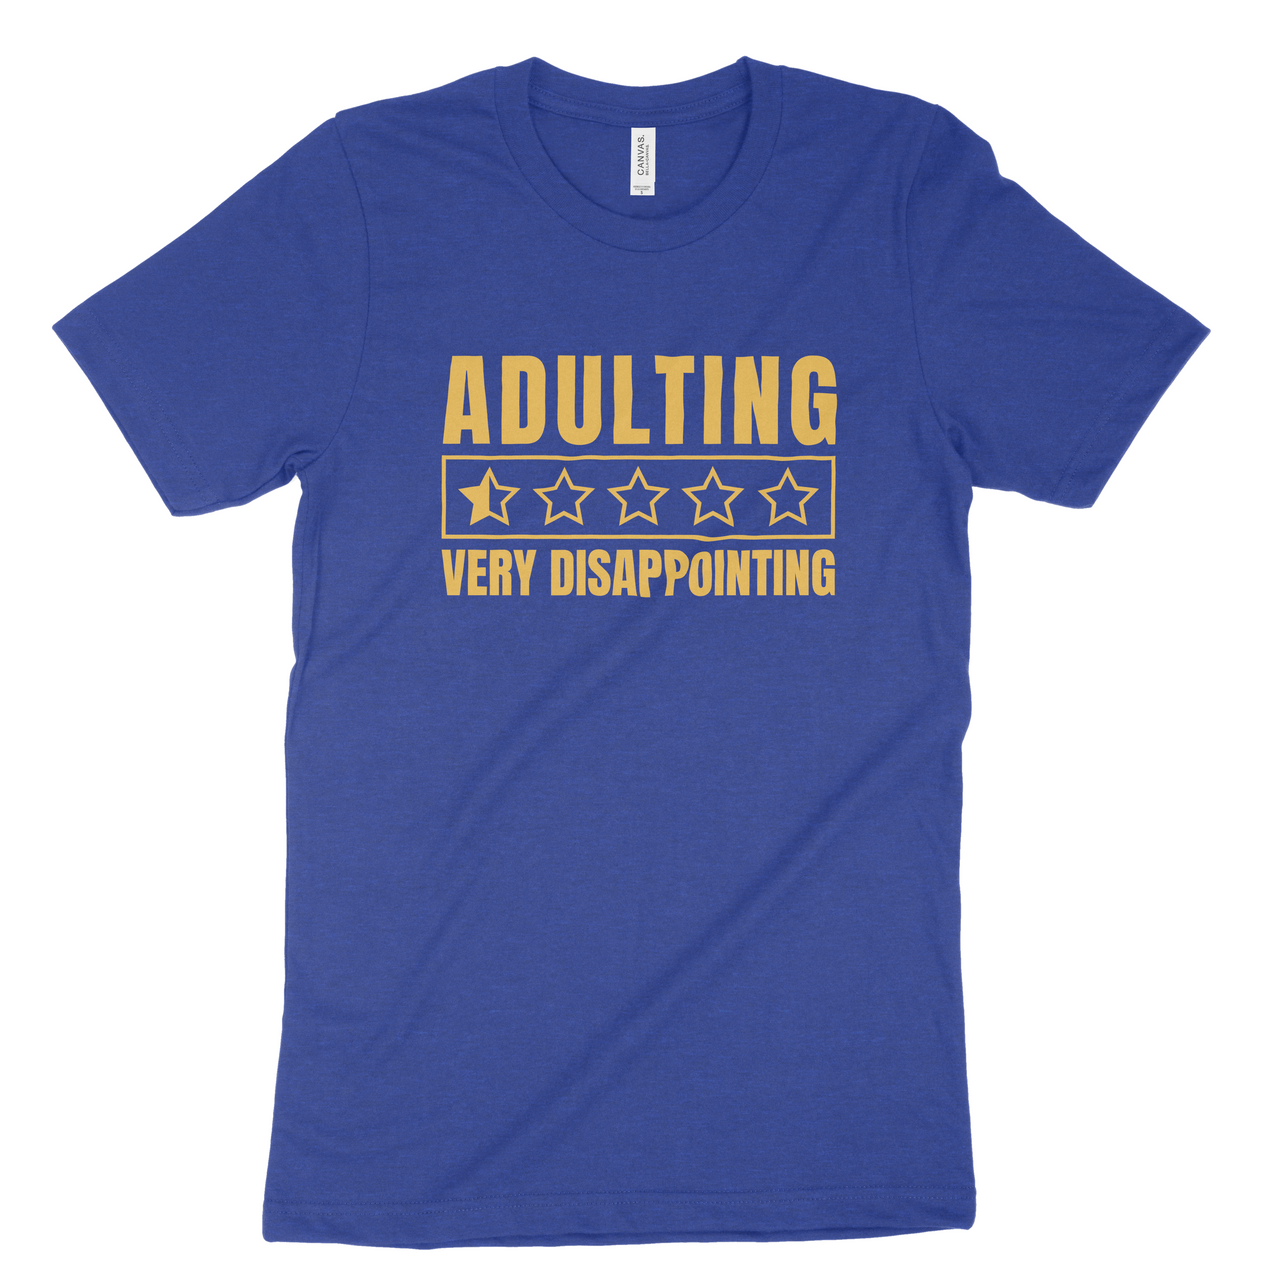 Adulthood T-Shirt - Adulting Very Disappointing